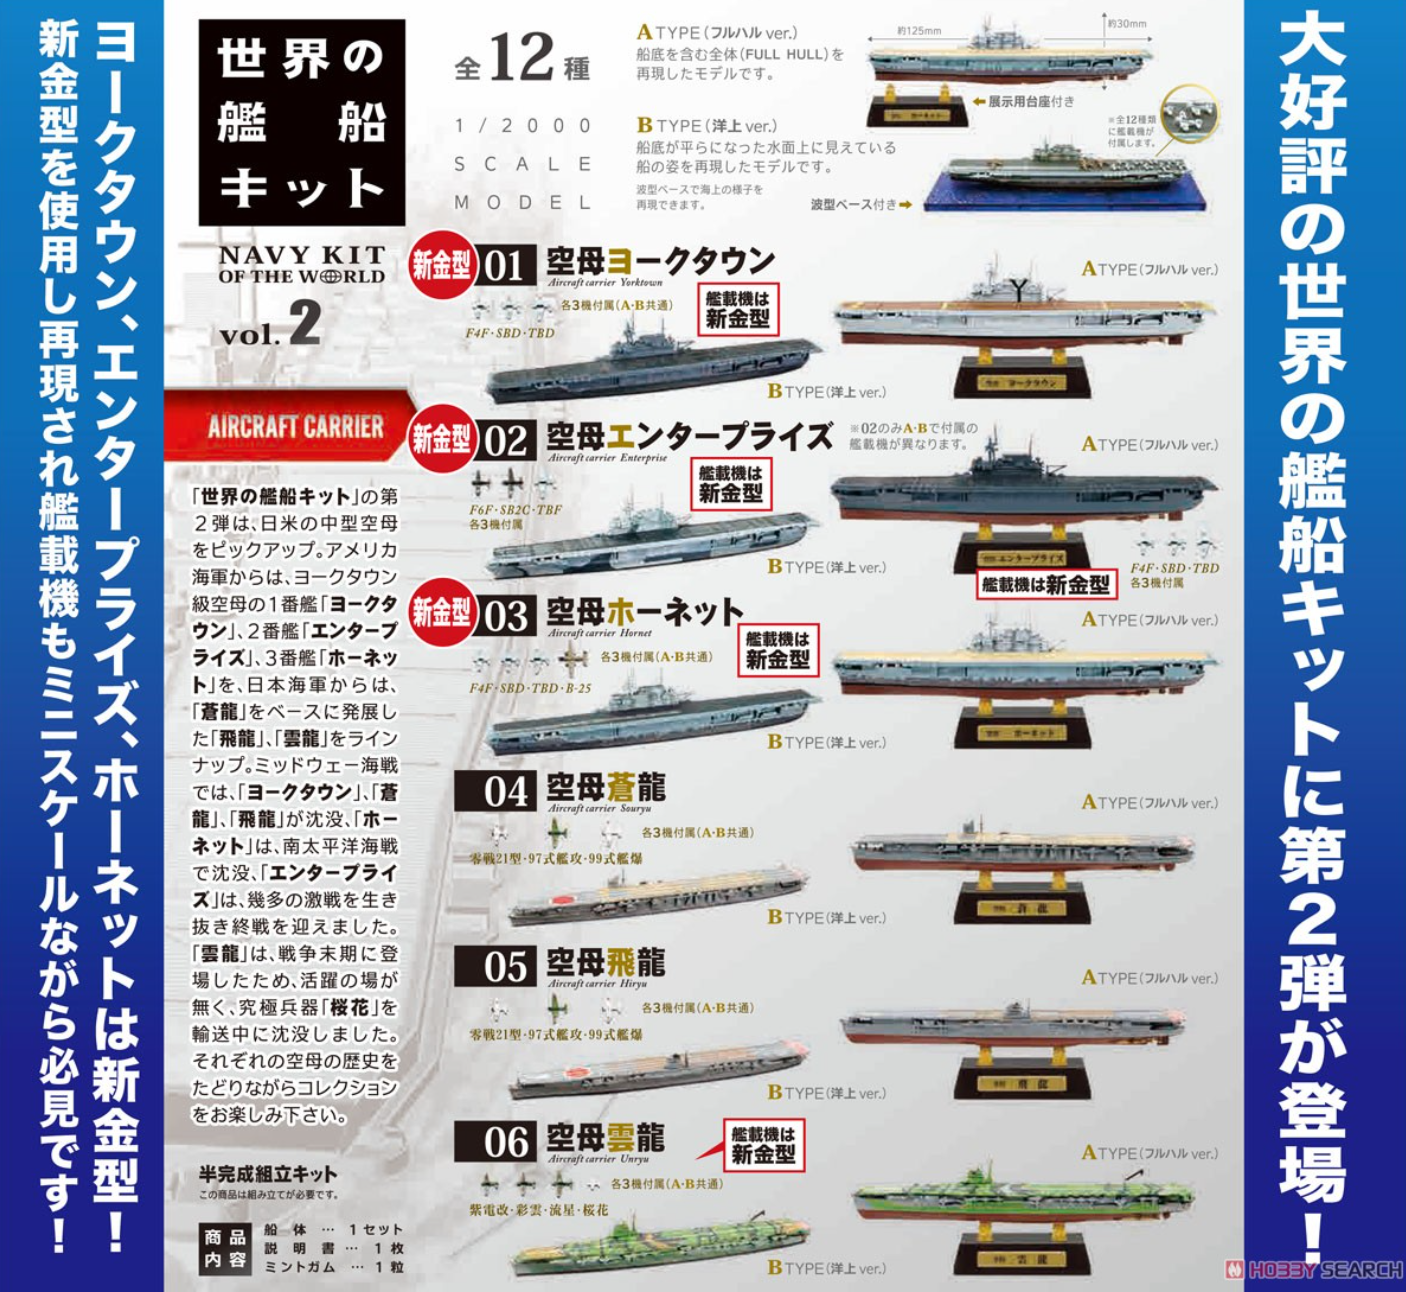 F-toys 1/2000 Navy Kit Of The World Battleship Collection Vol 2 12 Trading Figure Set